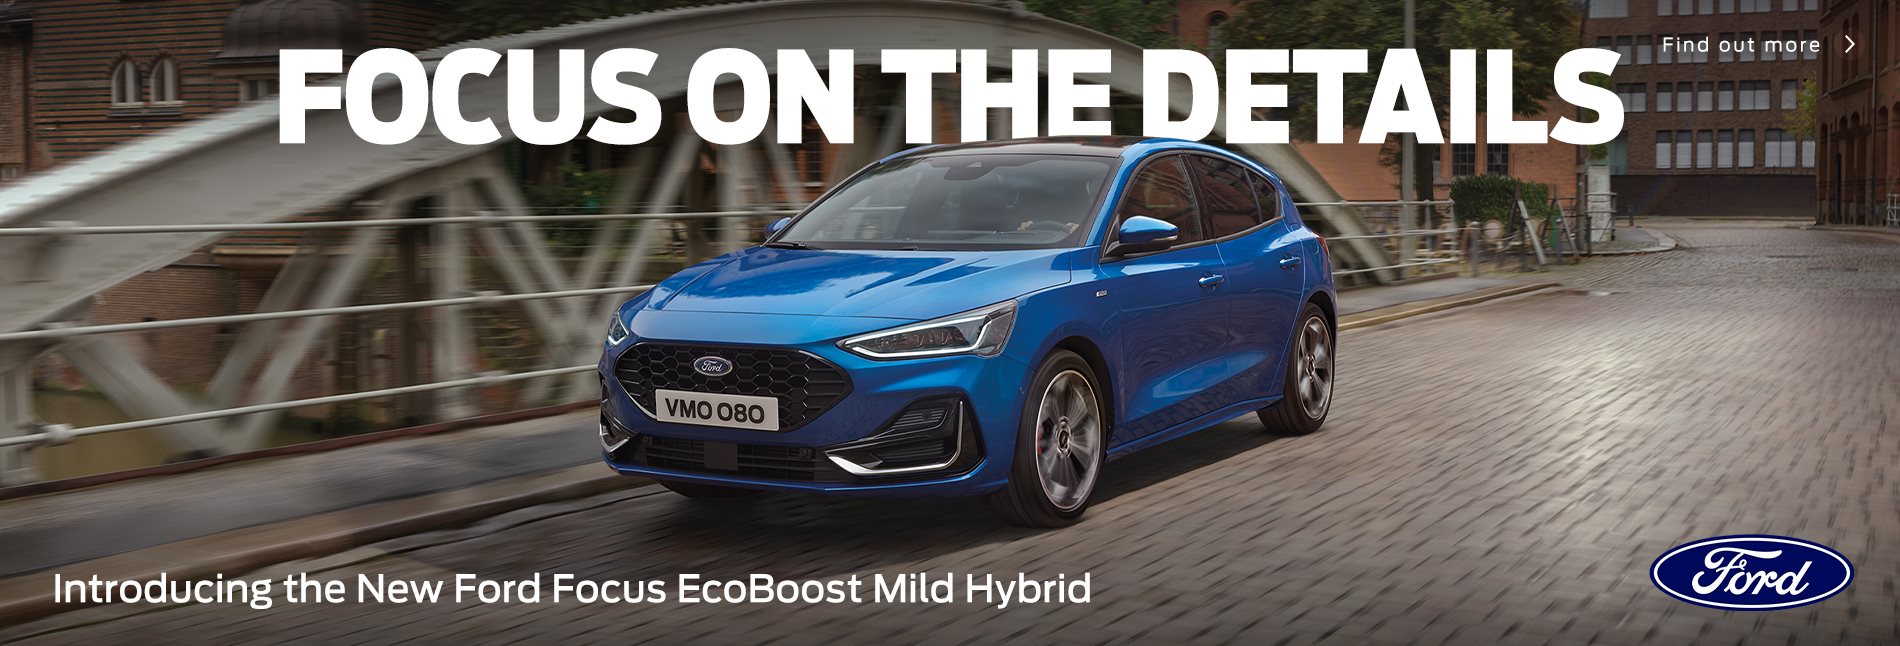 Find out about the New Focus